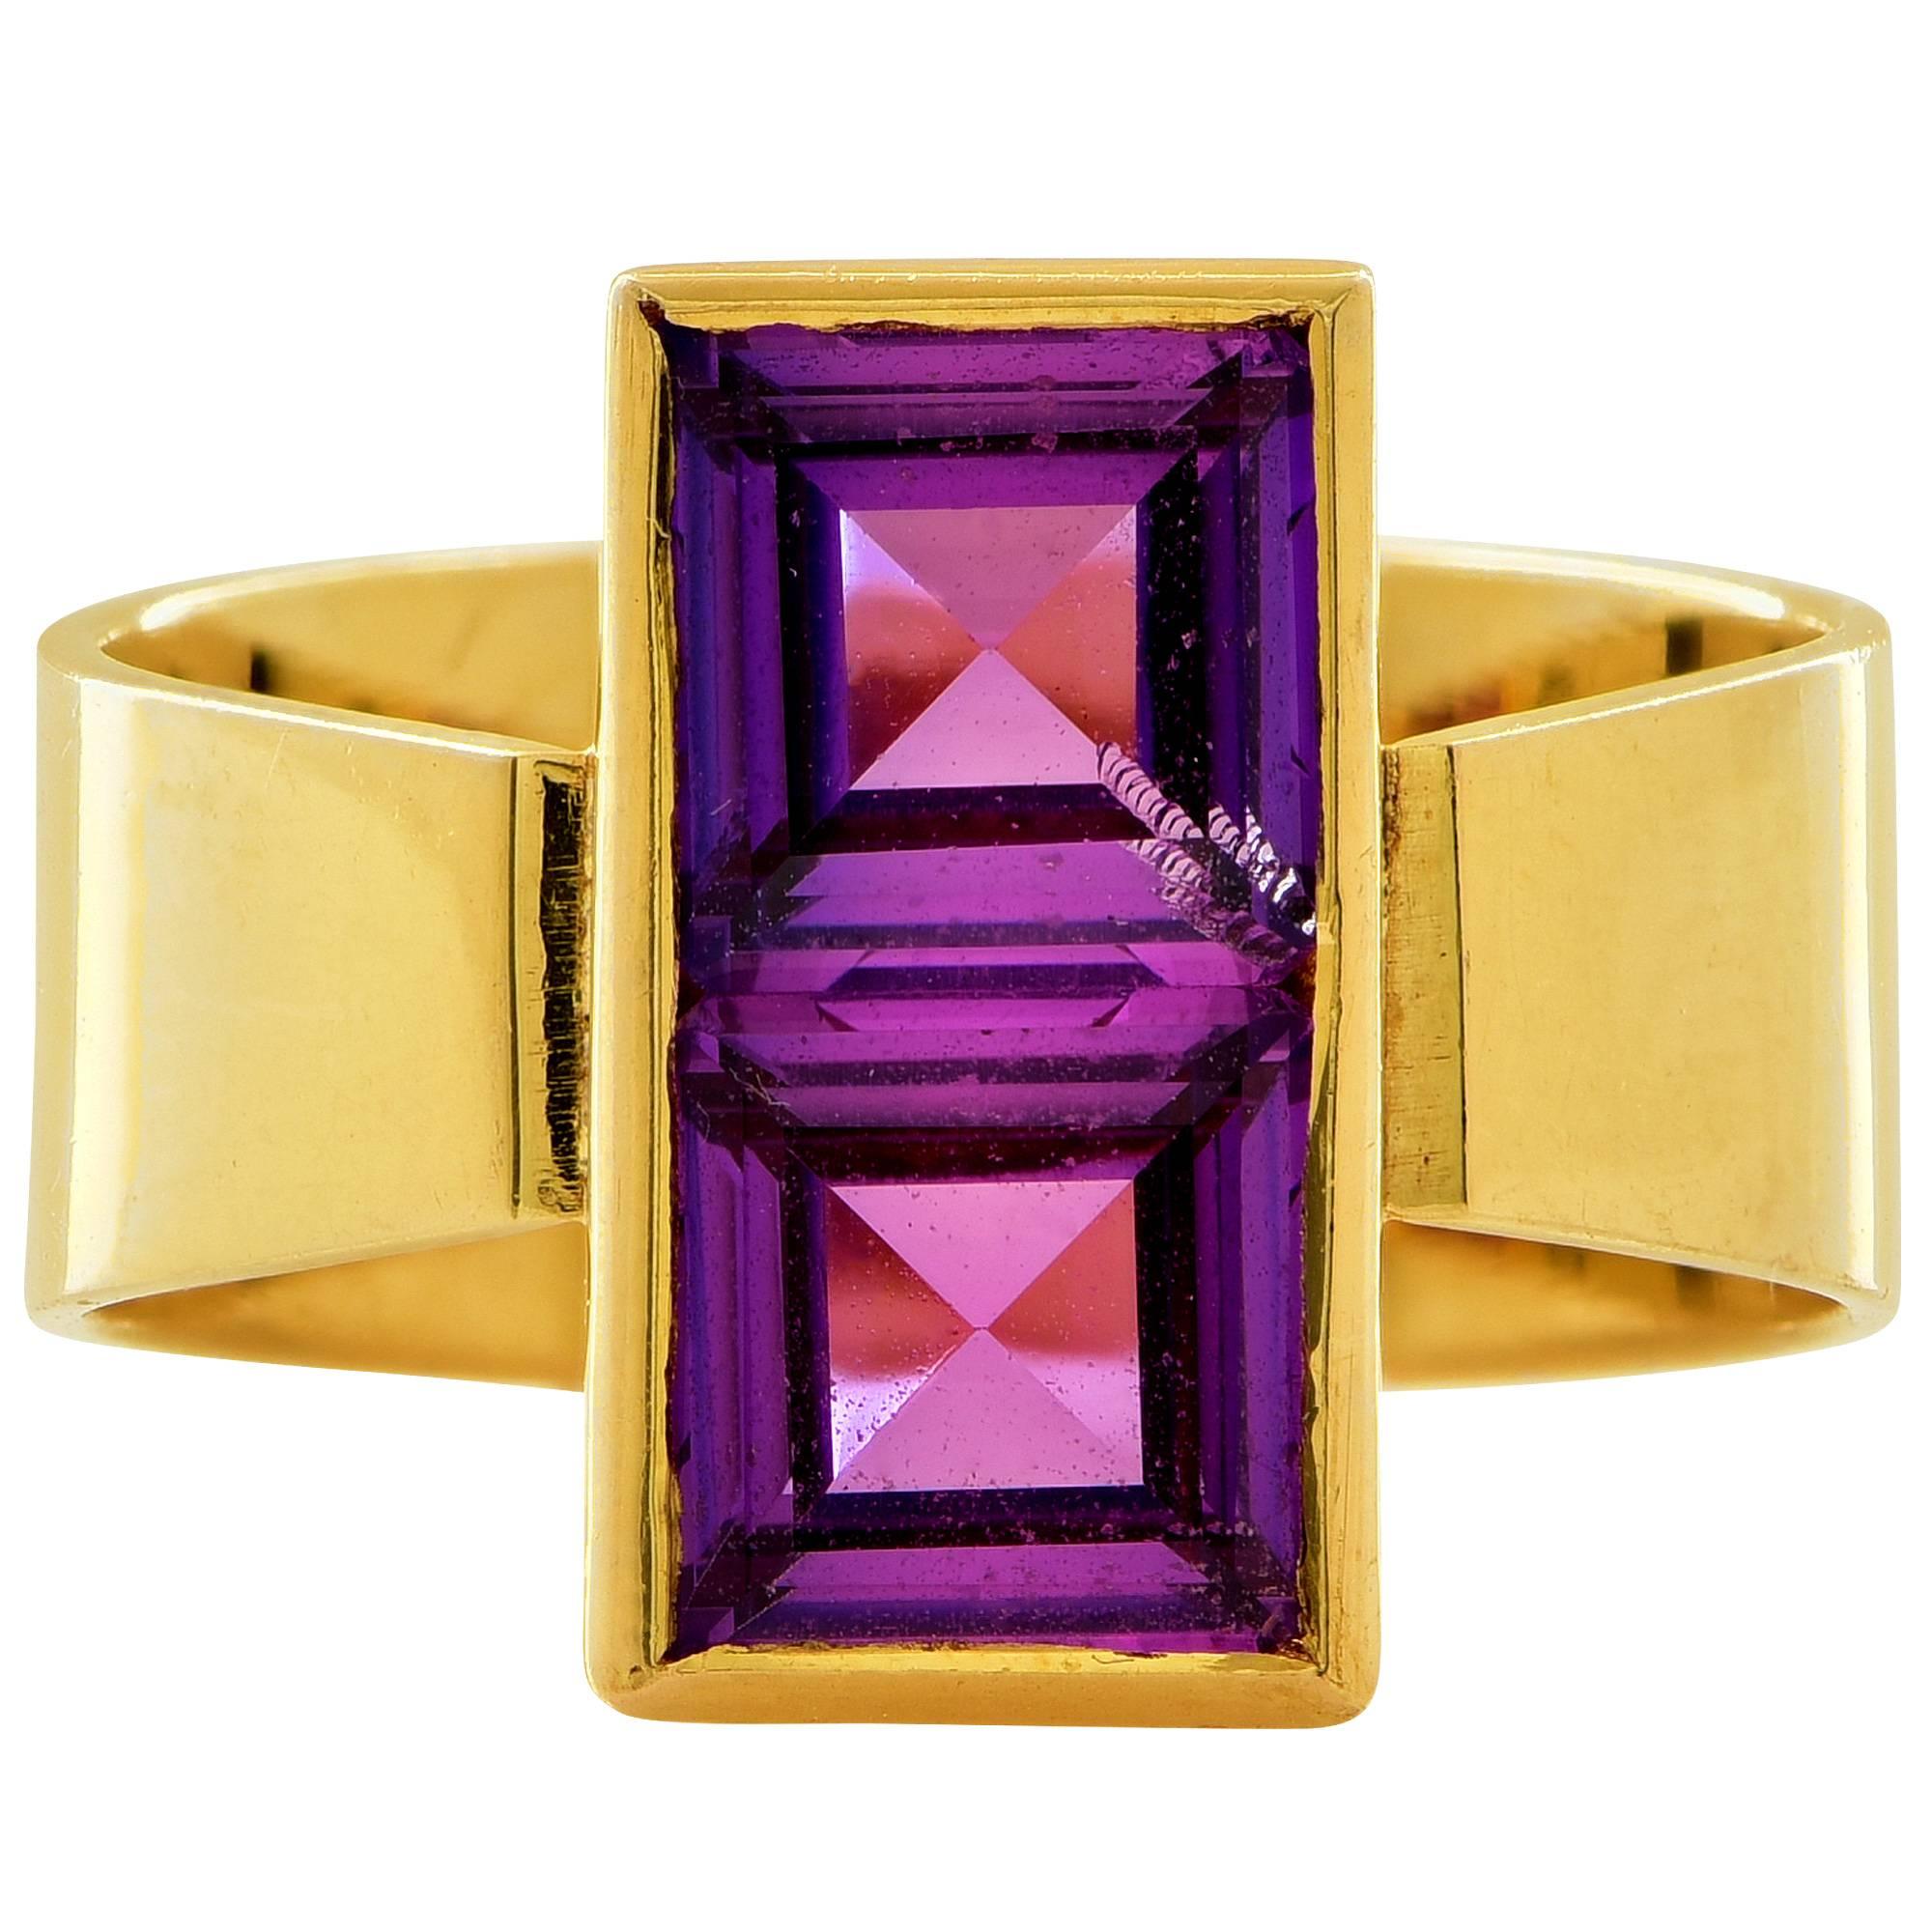 18k yellow gold ring featuring 2 square cut synthetic purple sapphires weighing approximately 4cts total.

The ring is a size 5.5 and can be sized up or down.
It is stamped and tested as 18k gold.
The metal weight is 7.93 grams.

This purple